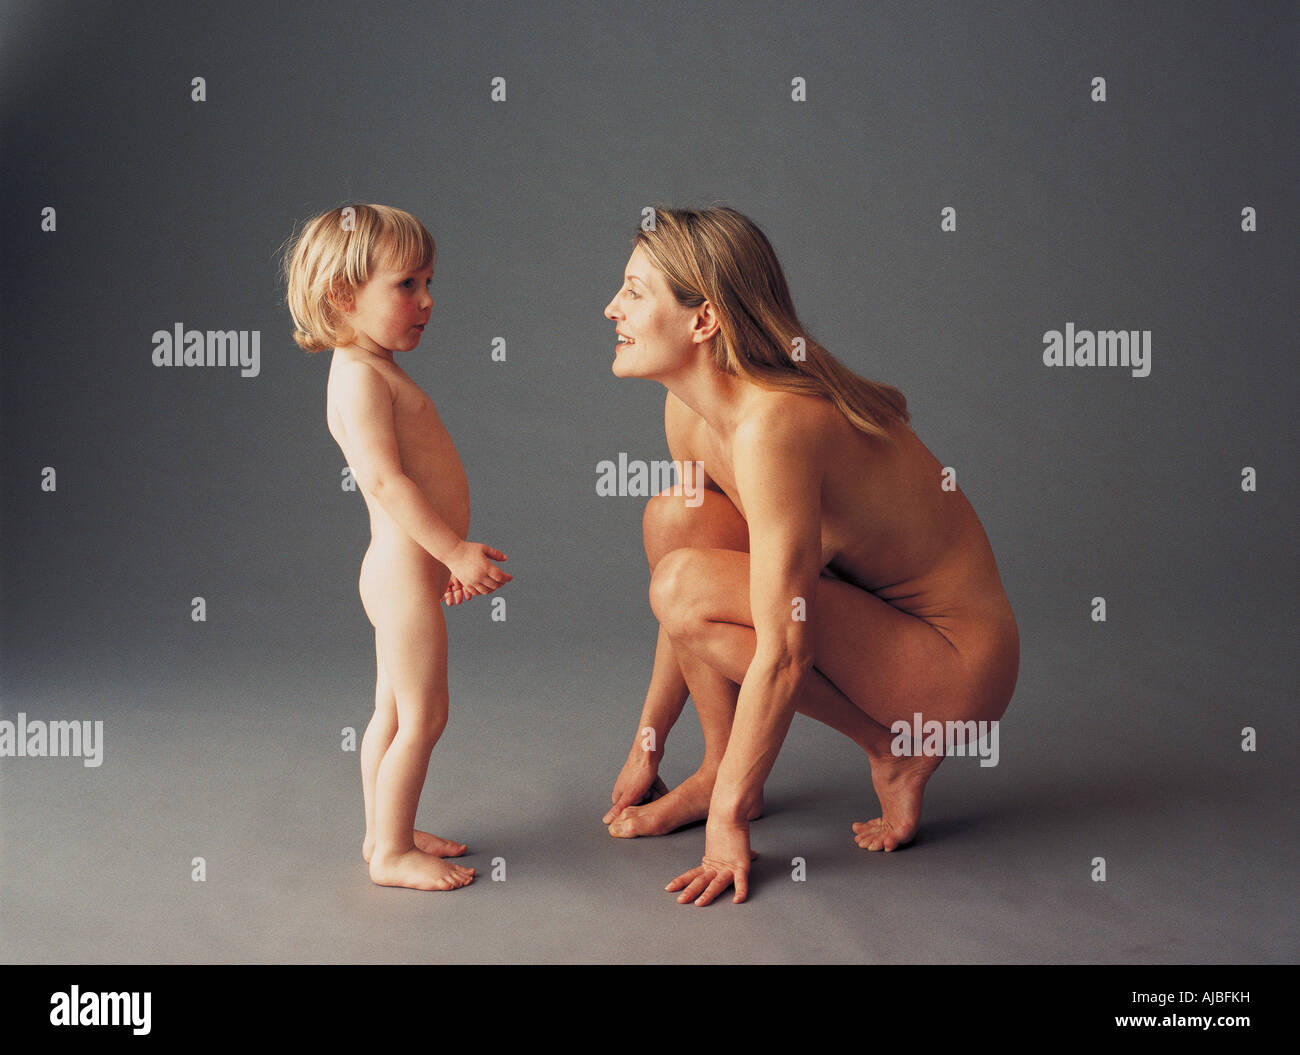 http://c8.alamy.com/comp/AJBFKH/nude-image-of-mother-and-infant-son-playing-AJBFKH.jpg